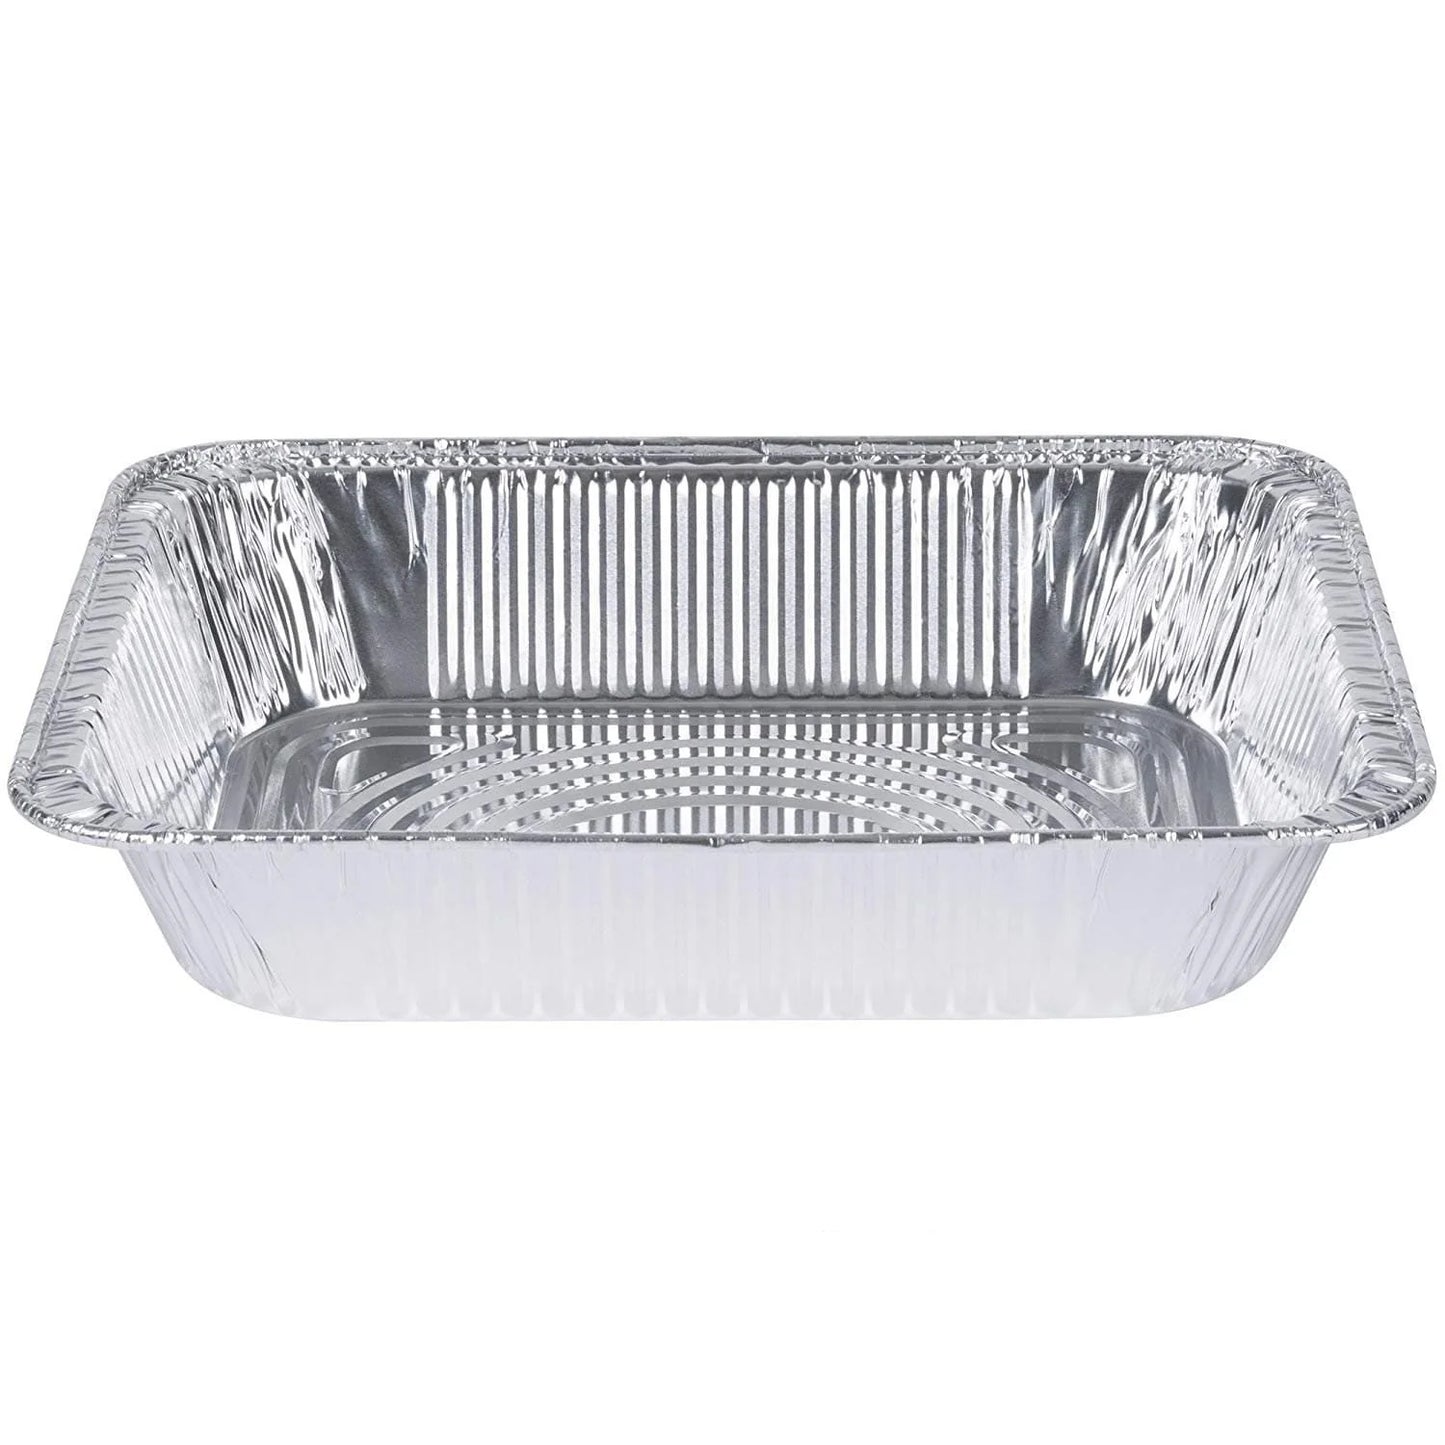 Disposable Aluminum Pan 1/2 Size Deep Foil Pan Extra Heavy Weight 9 x 13" Disposable Nicole Collection   